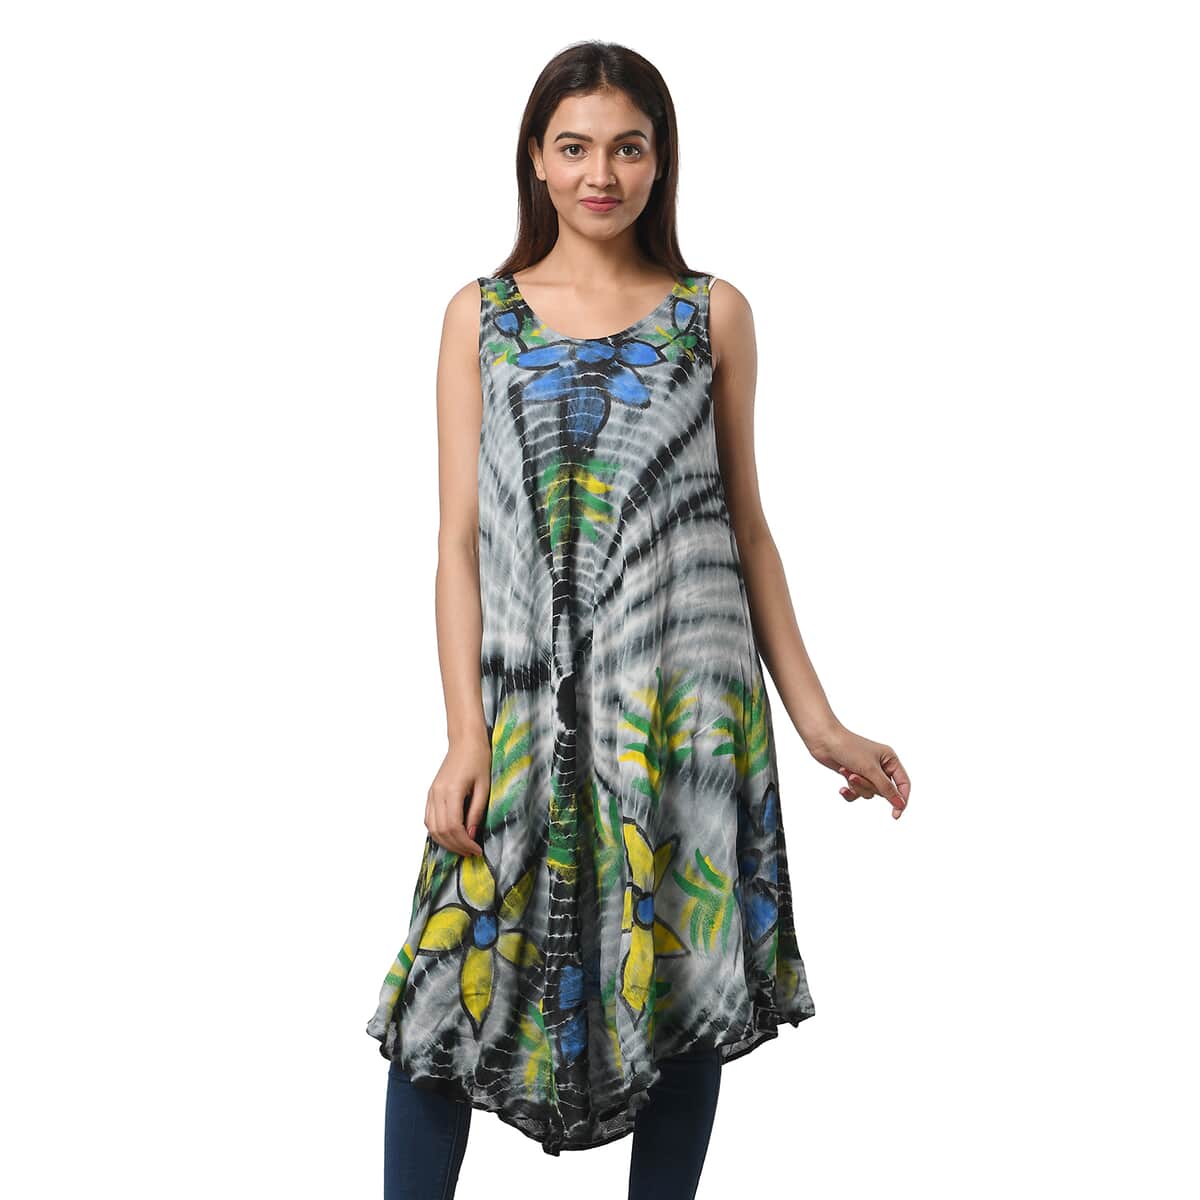 TAMSY Black Stripe Tie Dye with Floral Umbrella Dress - One Size Fits Most (48"x44") image number 2